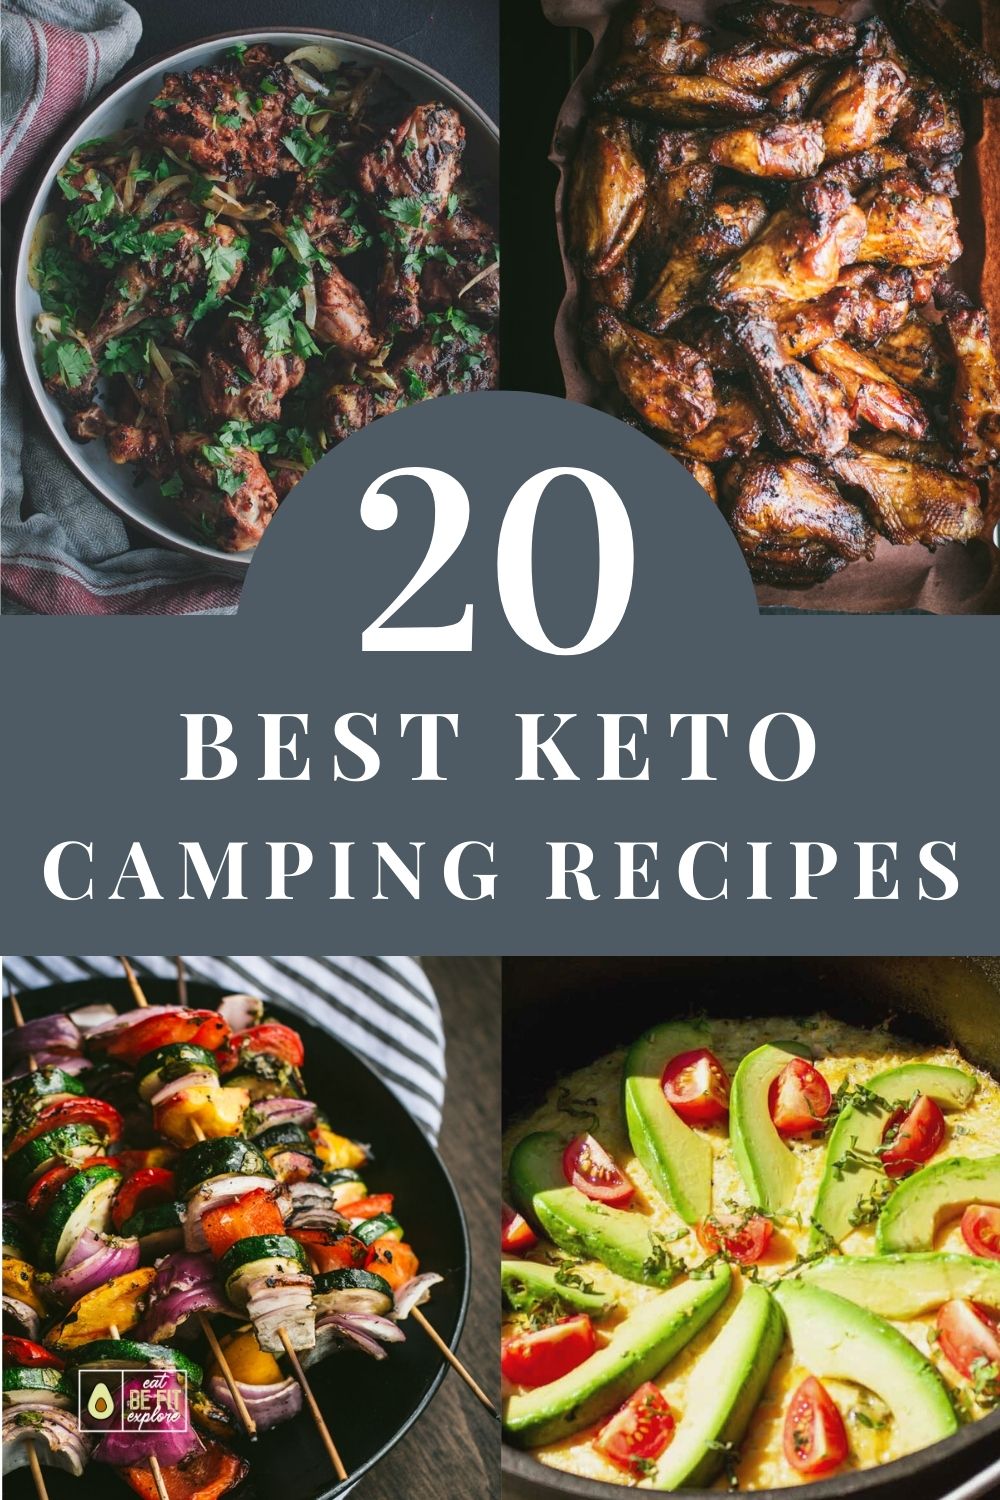 The Best Keto Camping Recipes